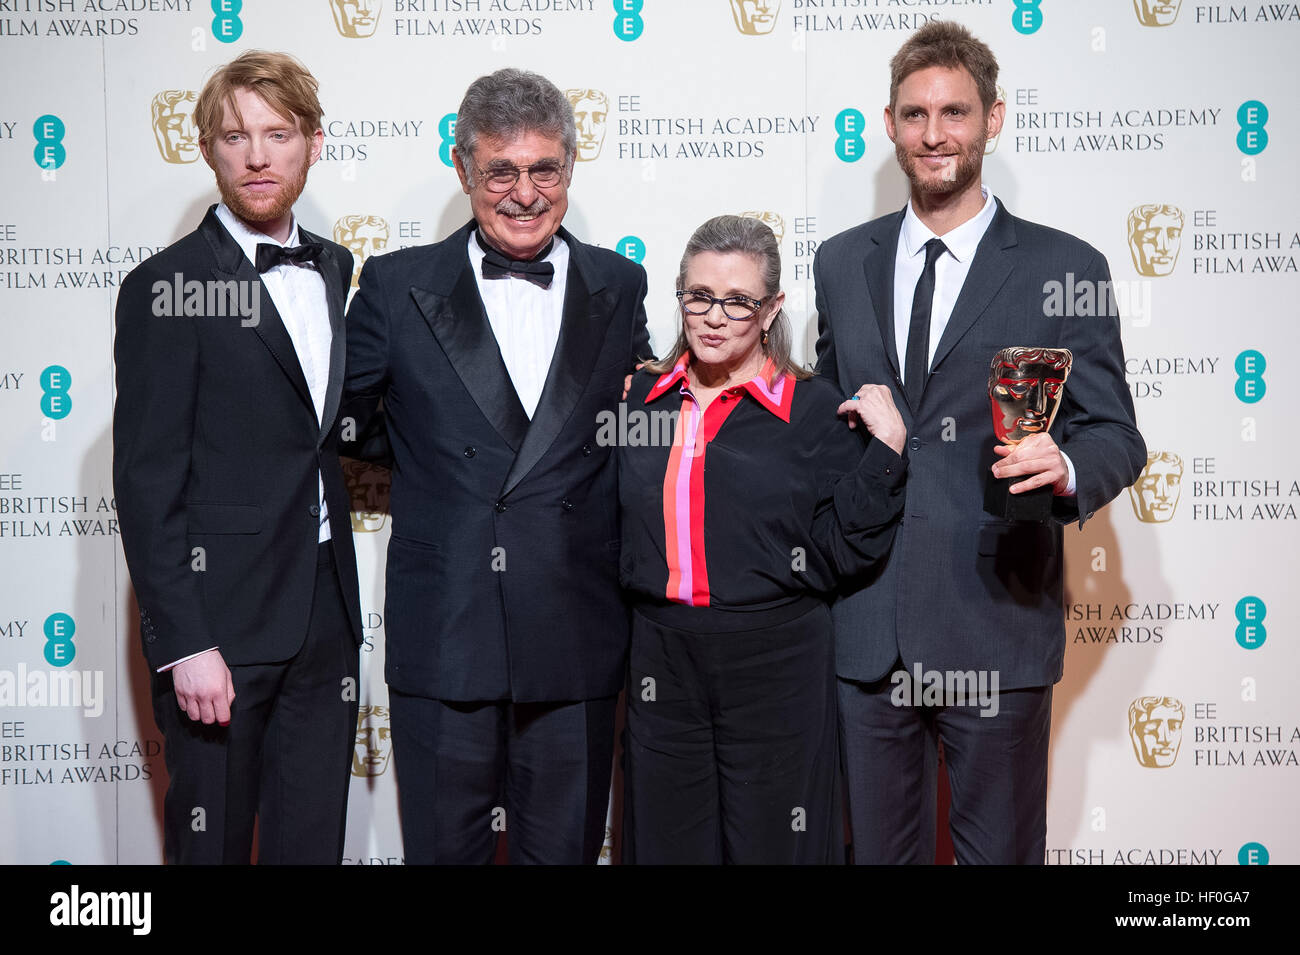 Argentinian director Damian Szifron (r) poses with the award for a film not in the English language for 'Wild Tales' with Hugo Sigman (2l) and award presenters actor Domhnall Gleeson (l) and actress Carrie Fisher (2r) pose in the press room of the EE British Academy Film Awards, BAFTA Awards, at the Royal Opera House in London, England, on 14 February 2016. Photo: Hubert Boesl /dpa - NO WIRE SERVICE - | usage worldwide Stock Photo